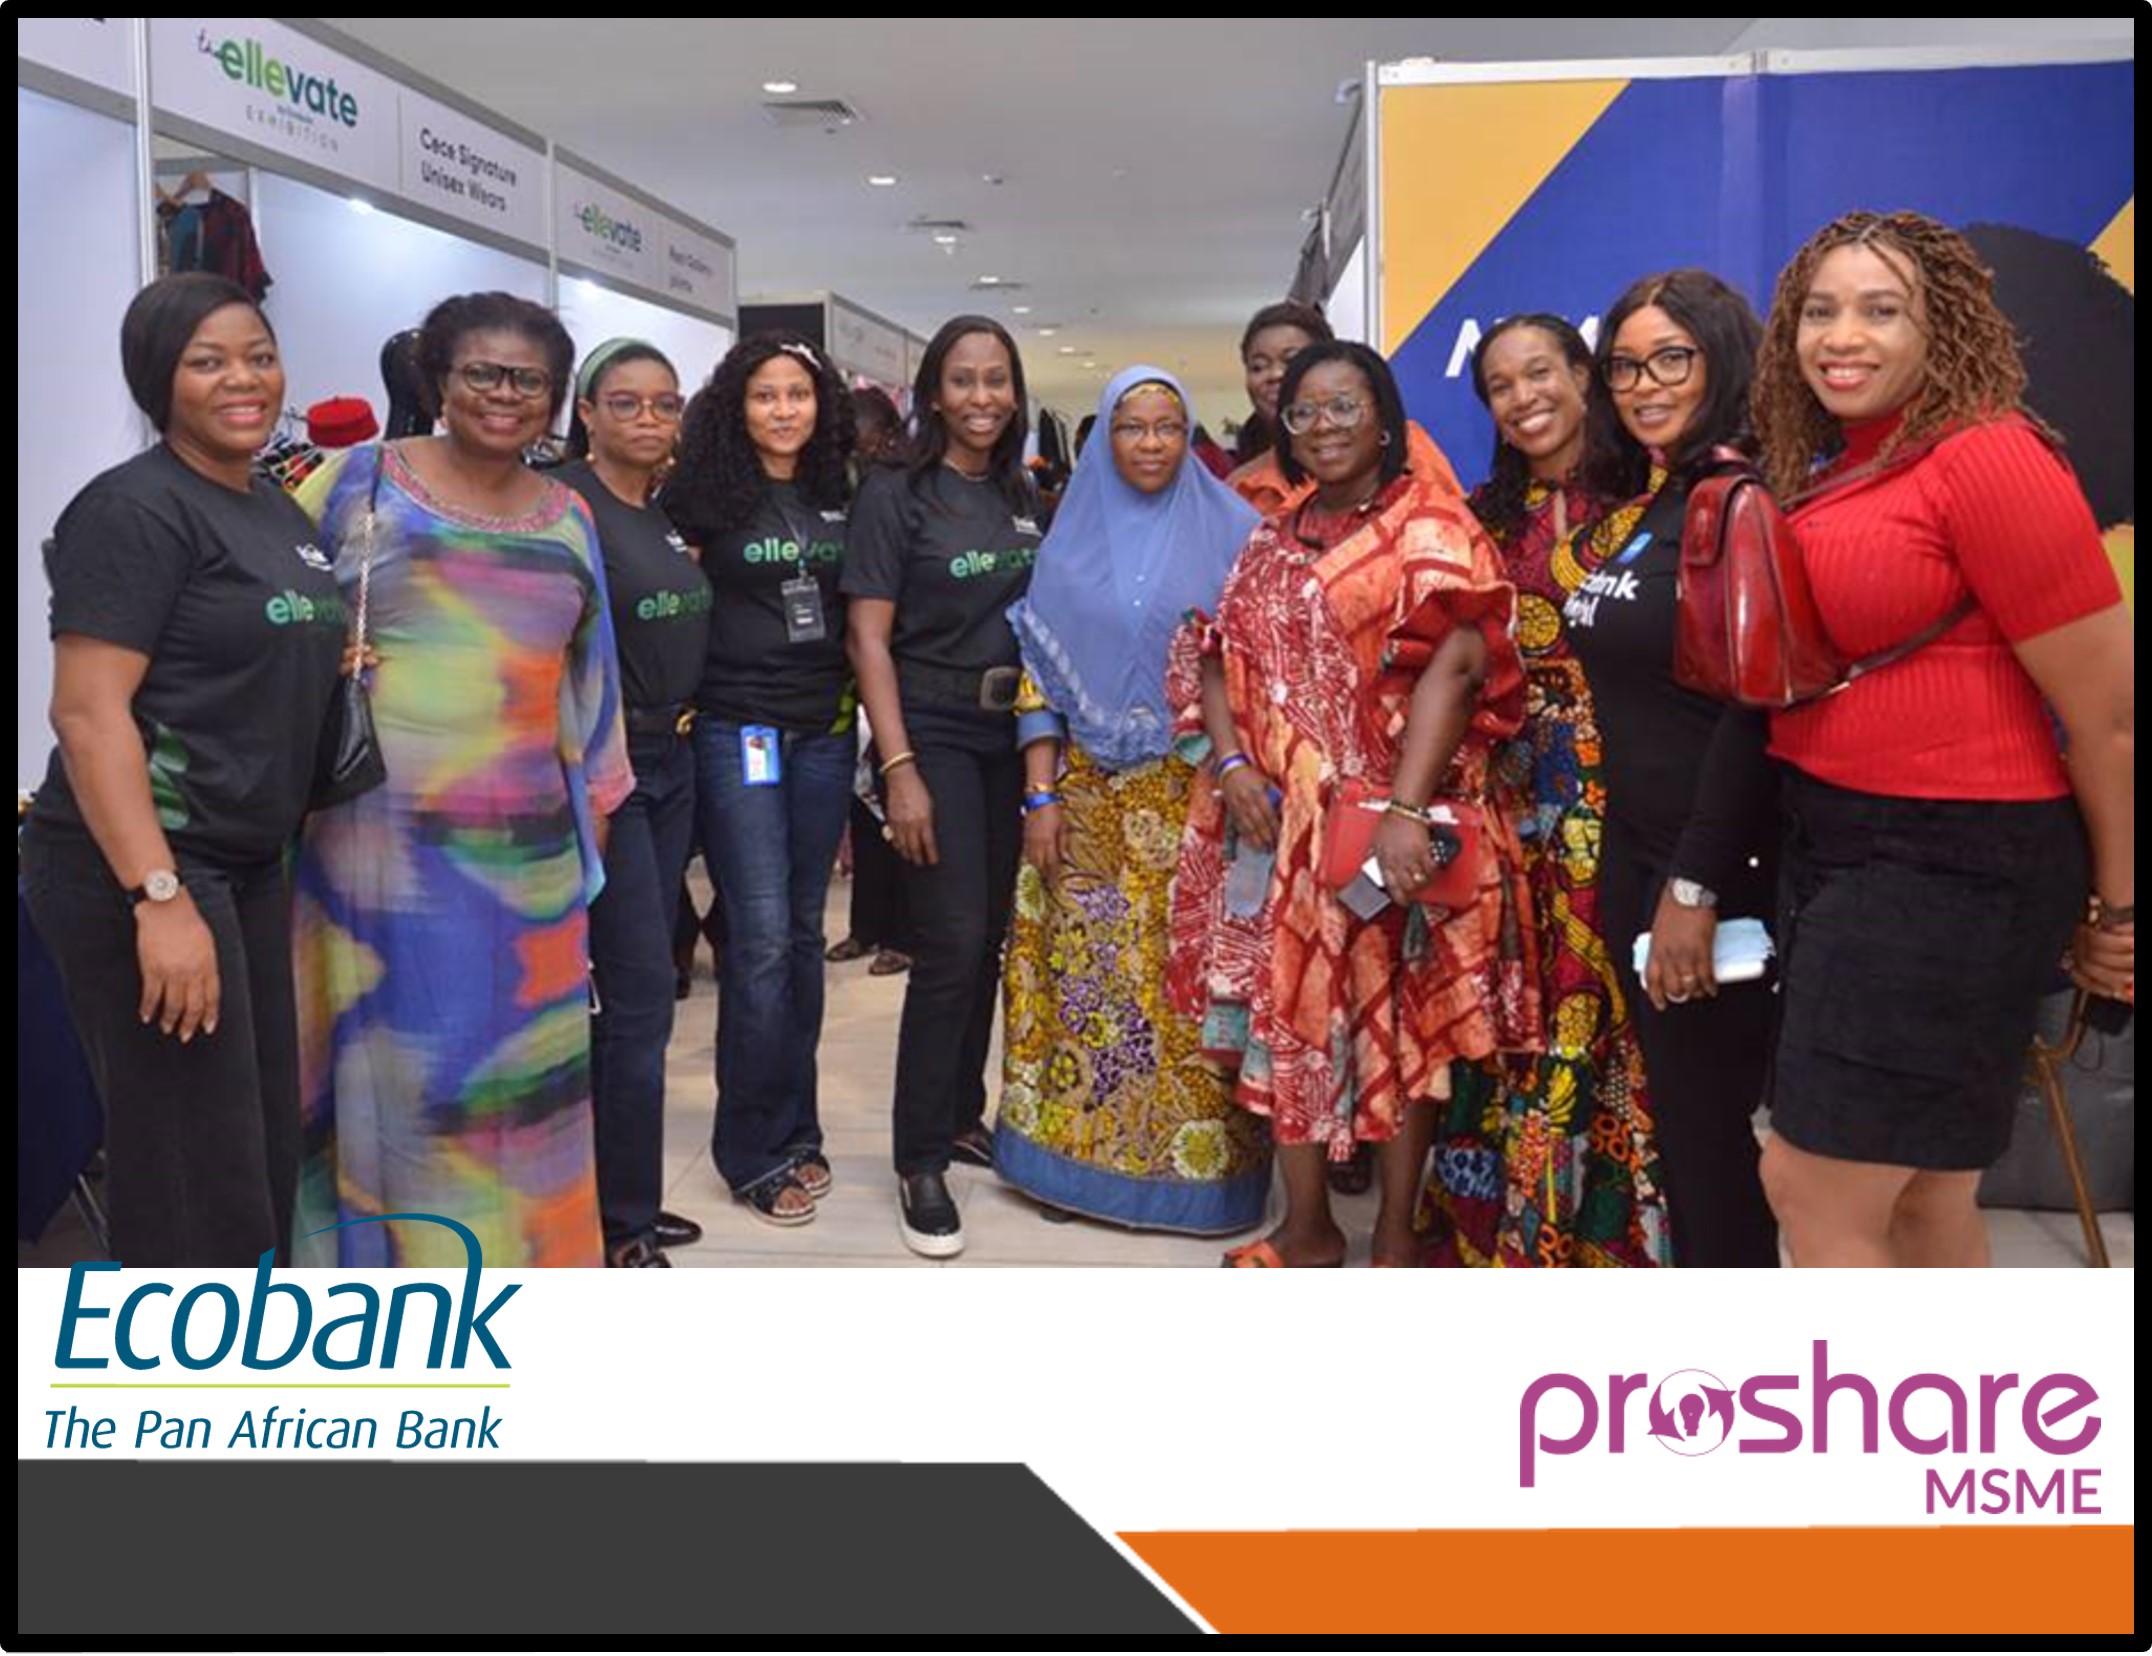 Ecobank Ellevate Exhibition Was an Opportunity to Prioritize Women Businesses - Carol Oyedeji